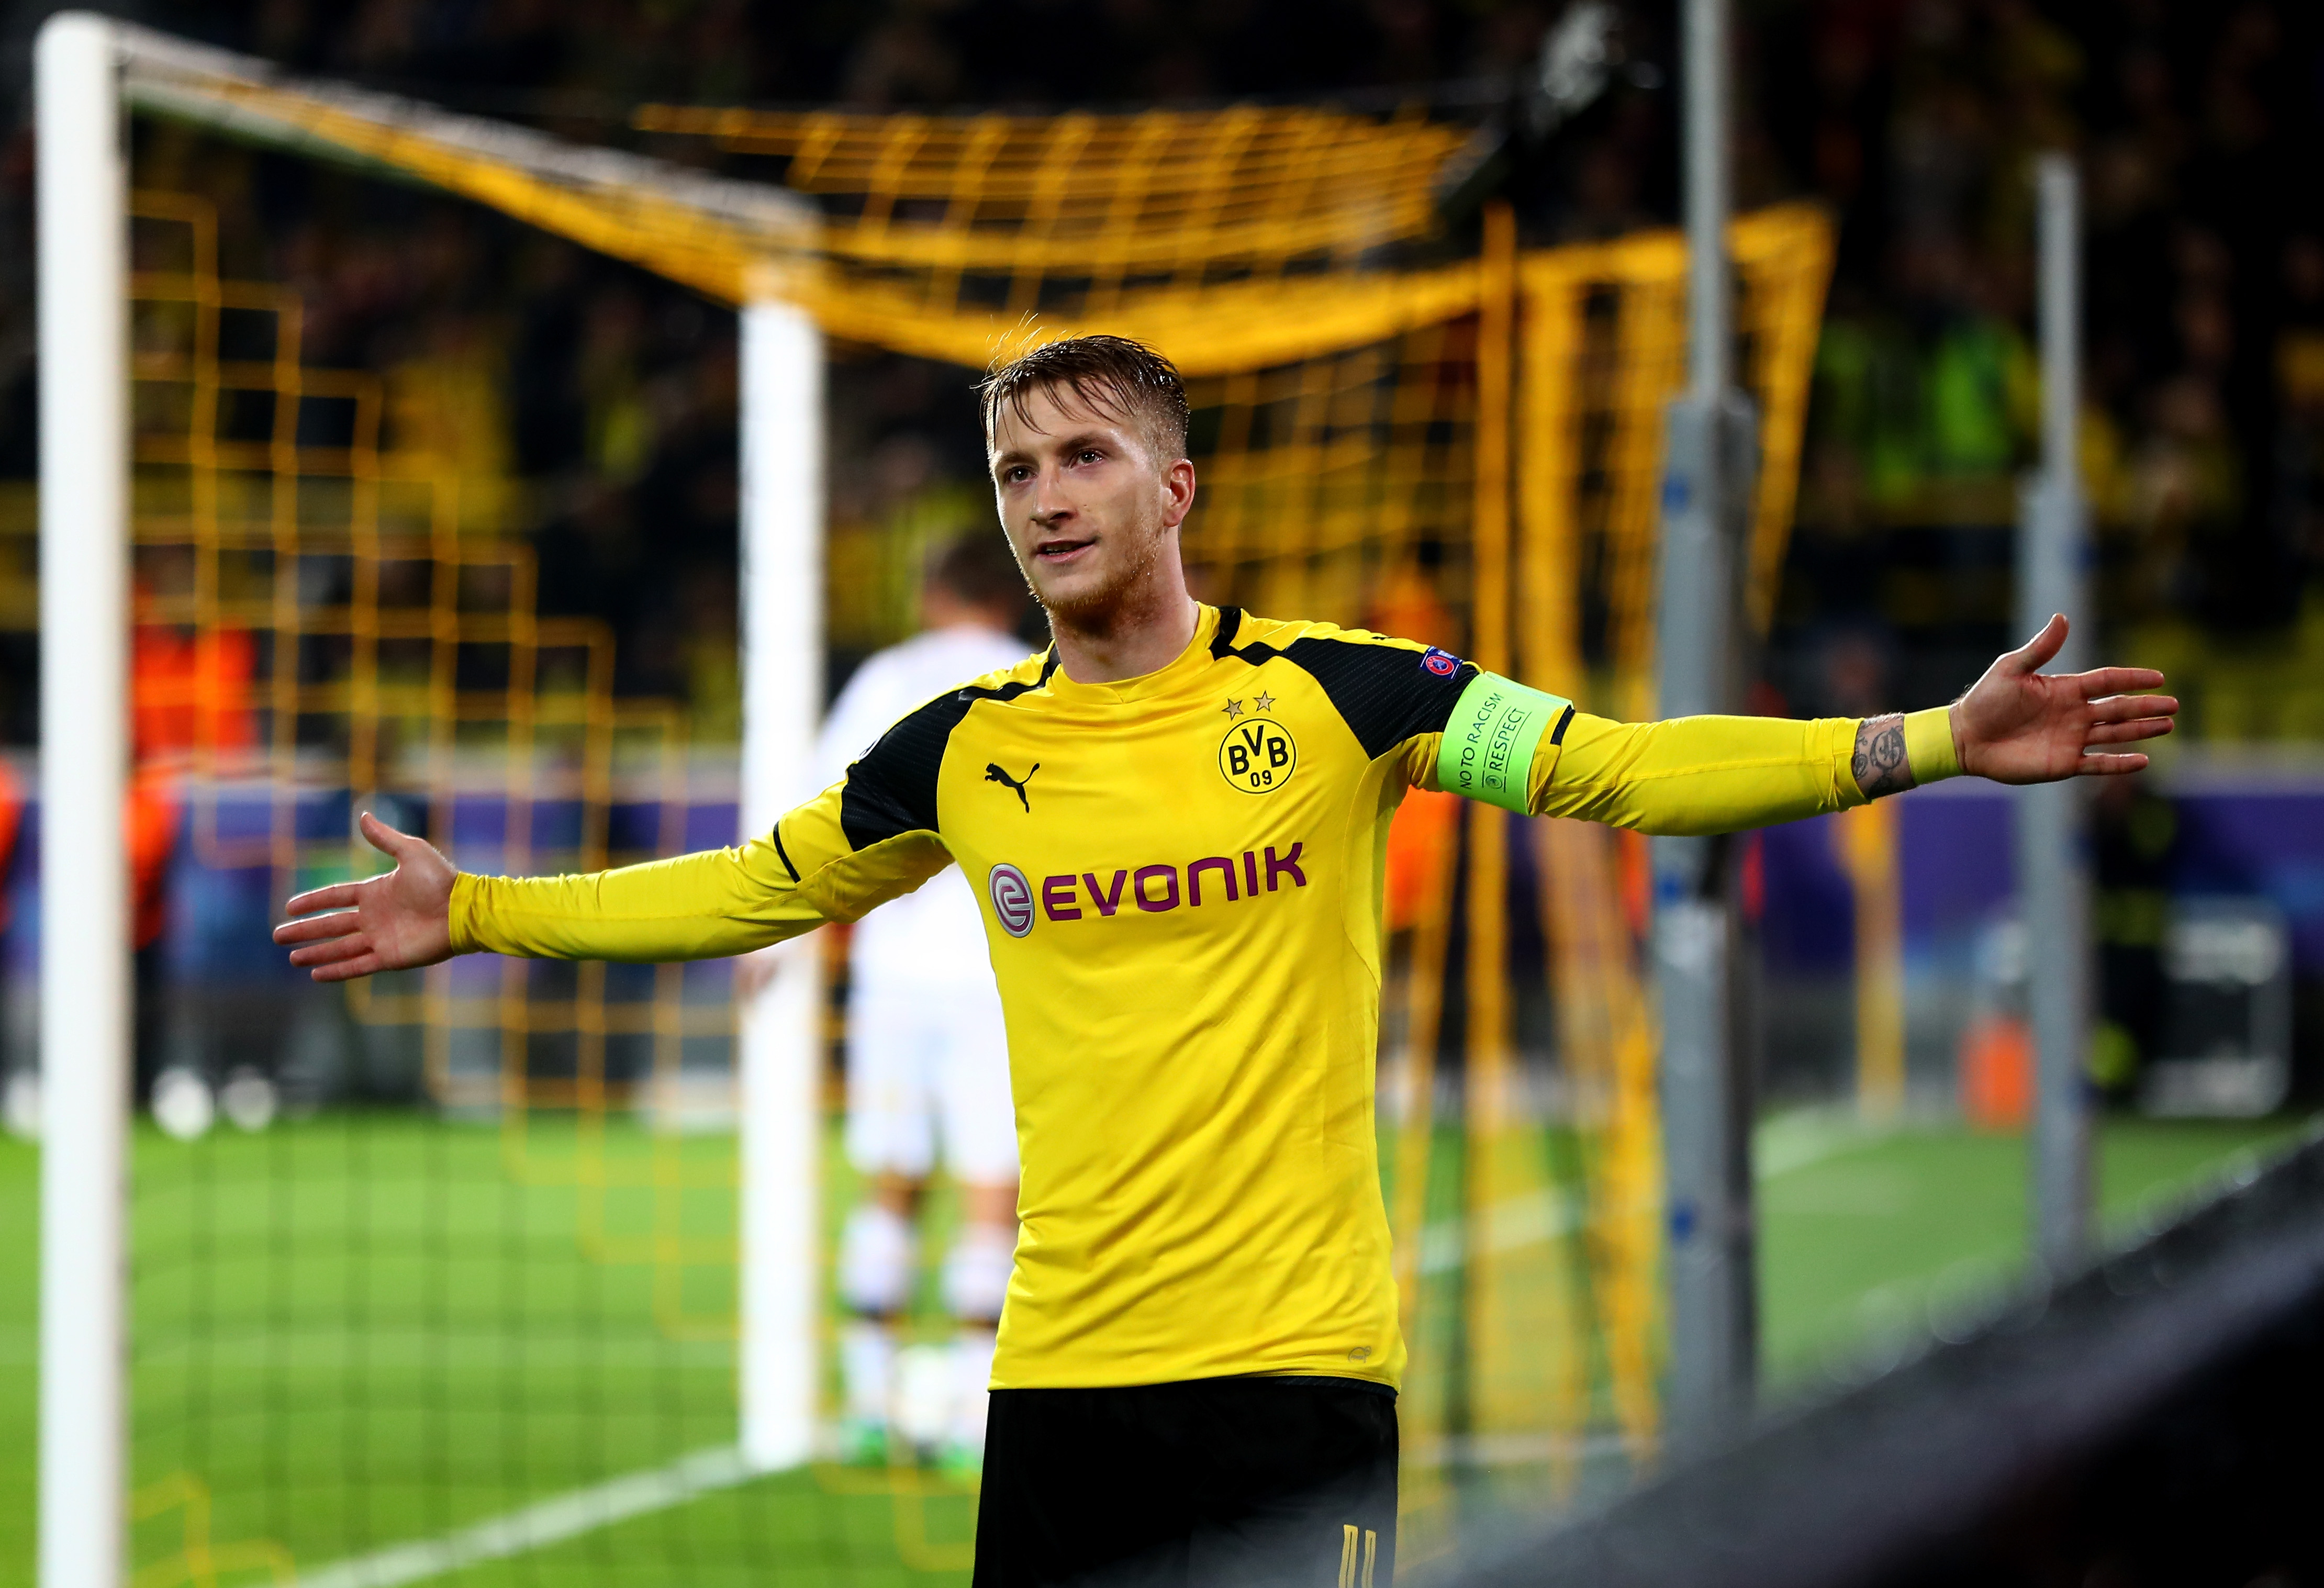 DORTMUND, GERMANY - NOVEMBER 22: Marco Reus of Borussia Dortmund celebrates scoring his third and his teams eighth during the UEFA Champions League Group F match between Borussia Dortmund and Legia Warszawa at Signal Iduna Park on November 22, 2016 in Dortmund, North Rhine-Westphalia.  (Photo by Alex Grimm/Bongarts/Getty Images)